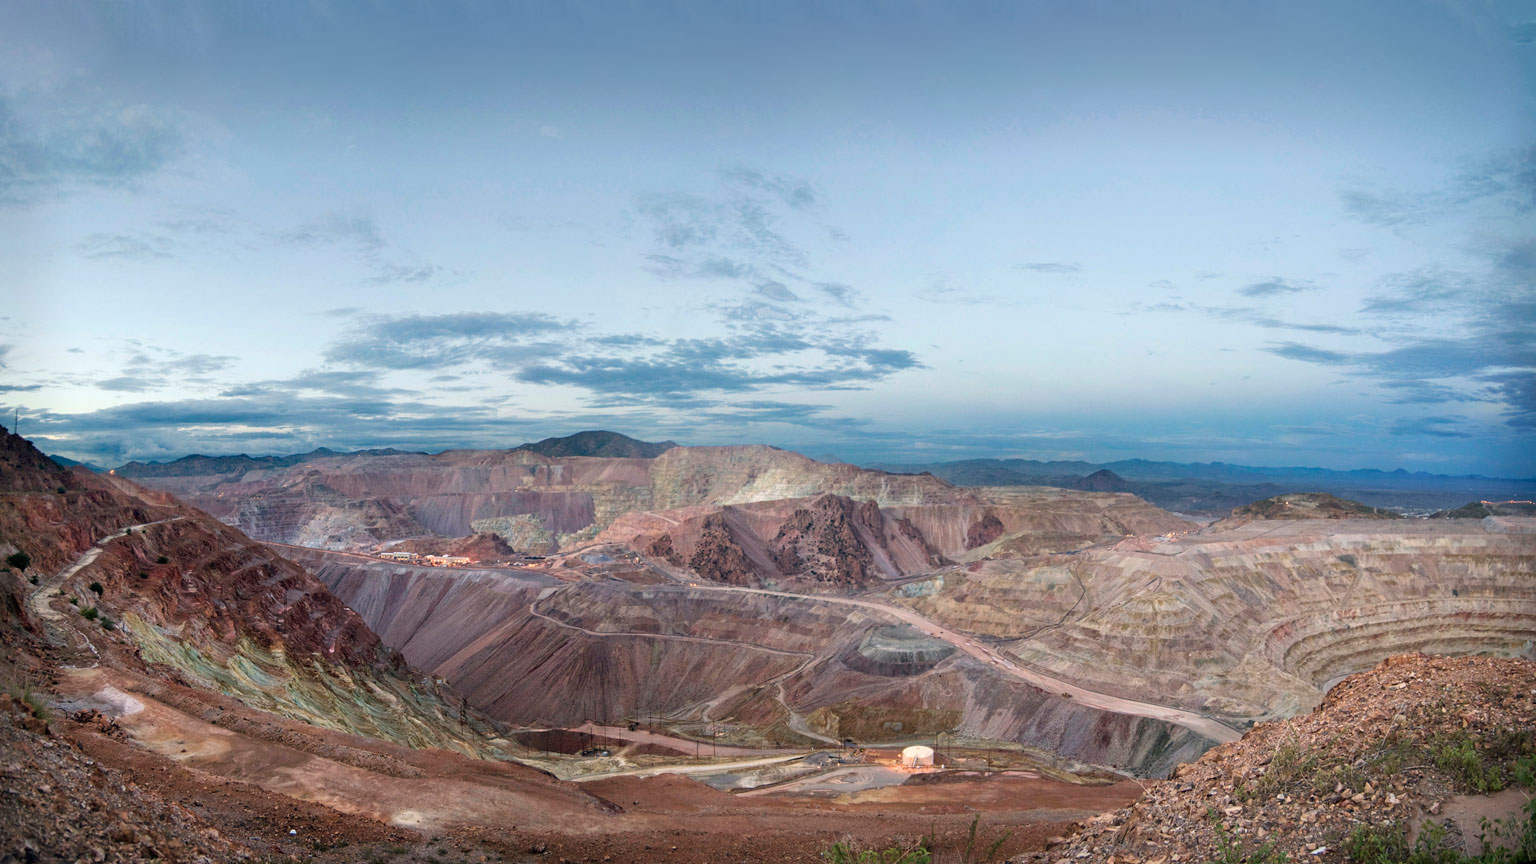 It's one of the five Cs of Arizona's economy. But what role does mining really play in Arizona today?